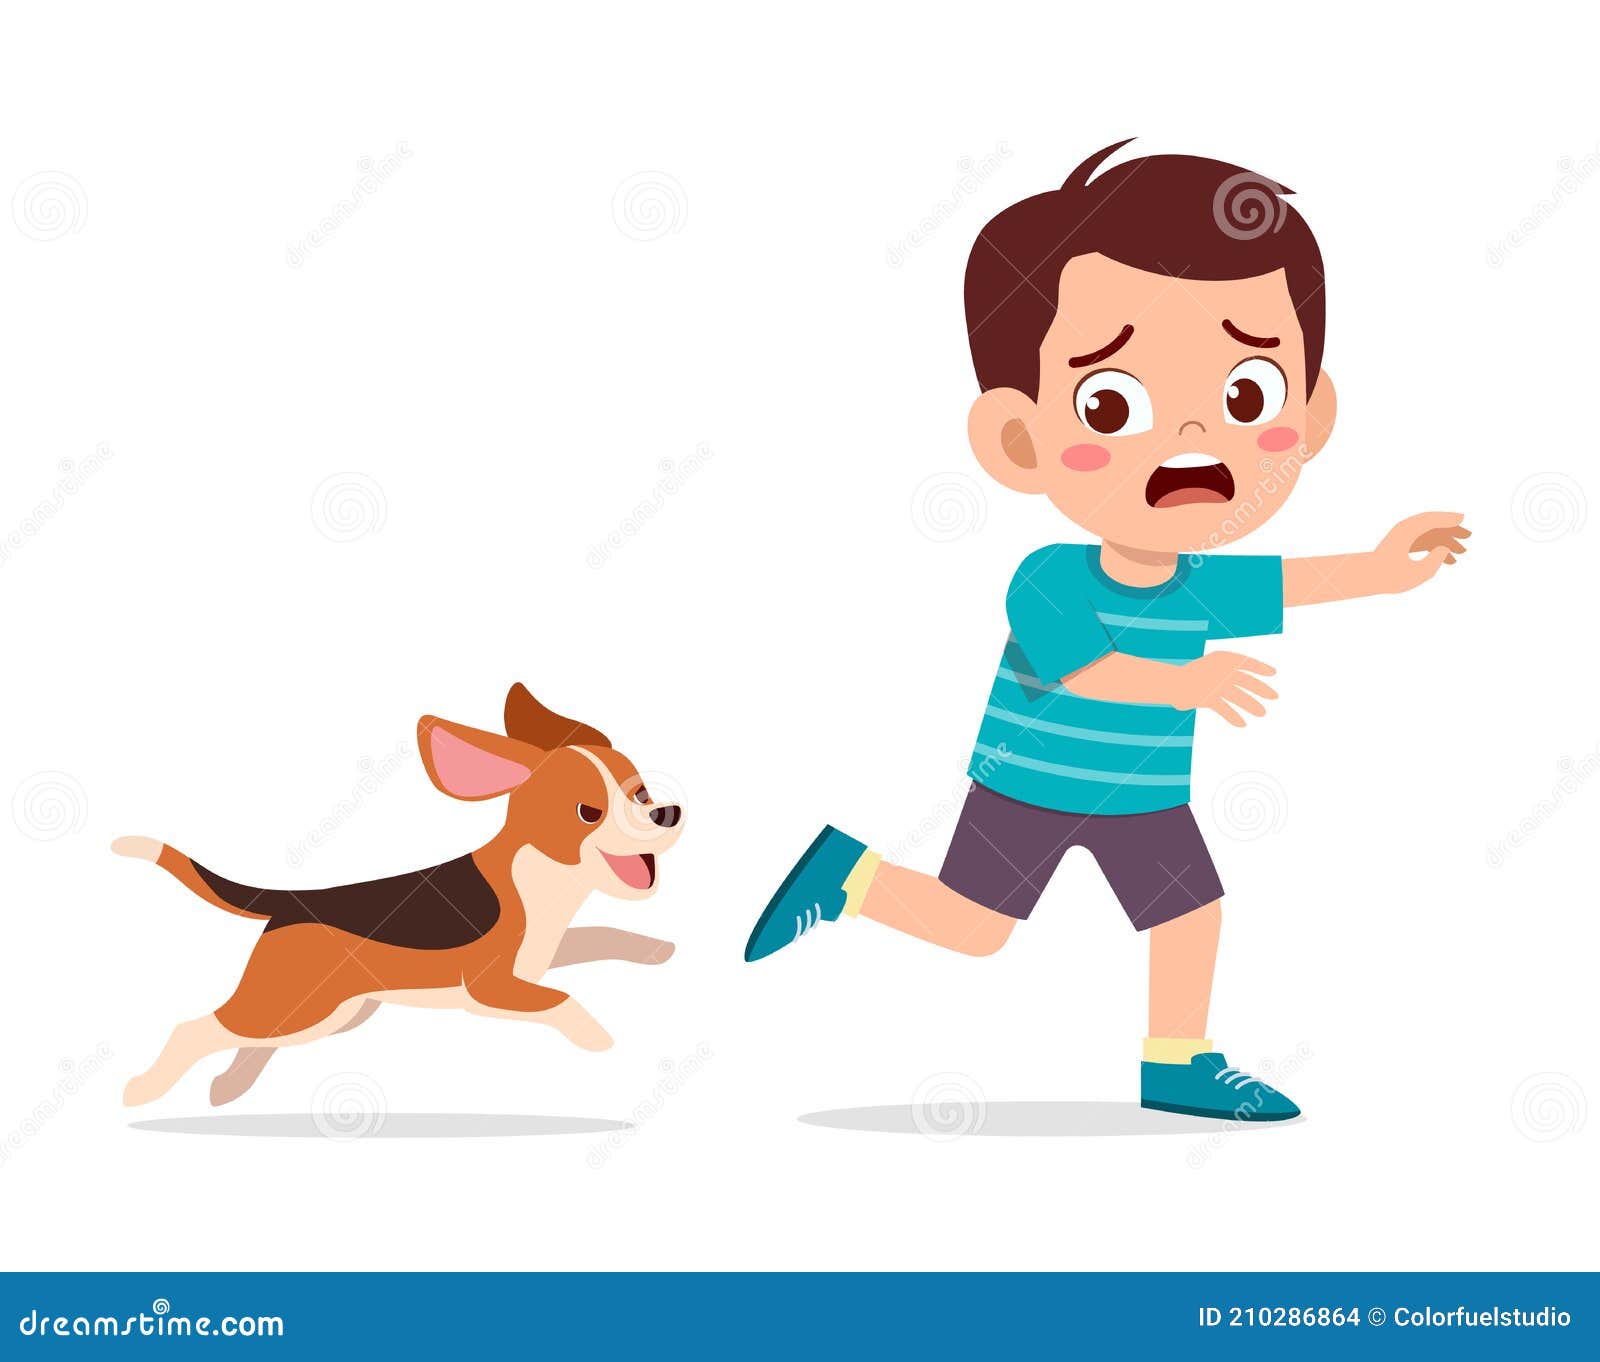 List 92+ Images the boy is afraid of your dog in spanish Completed